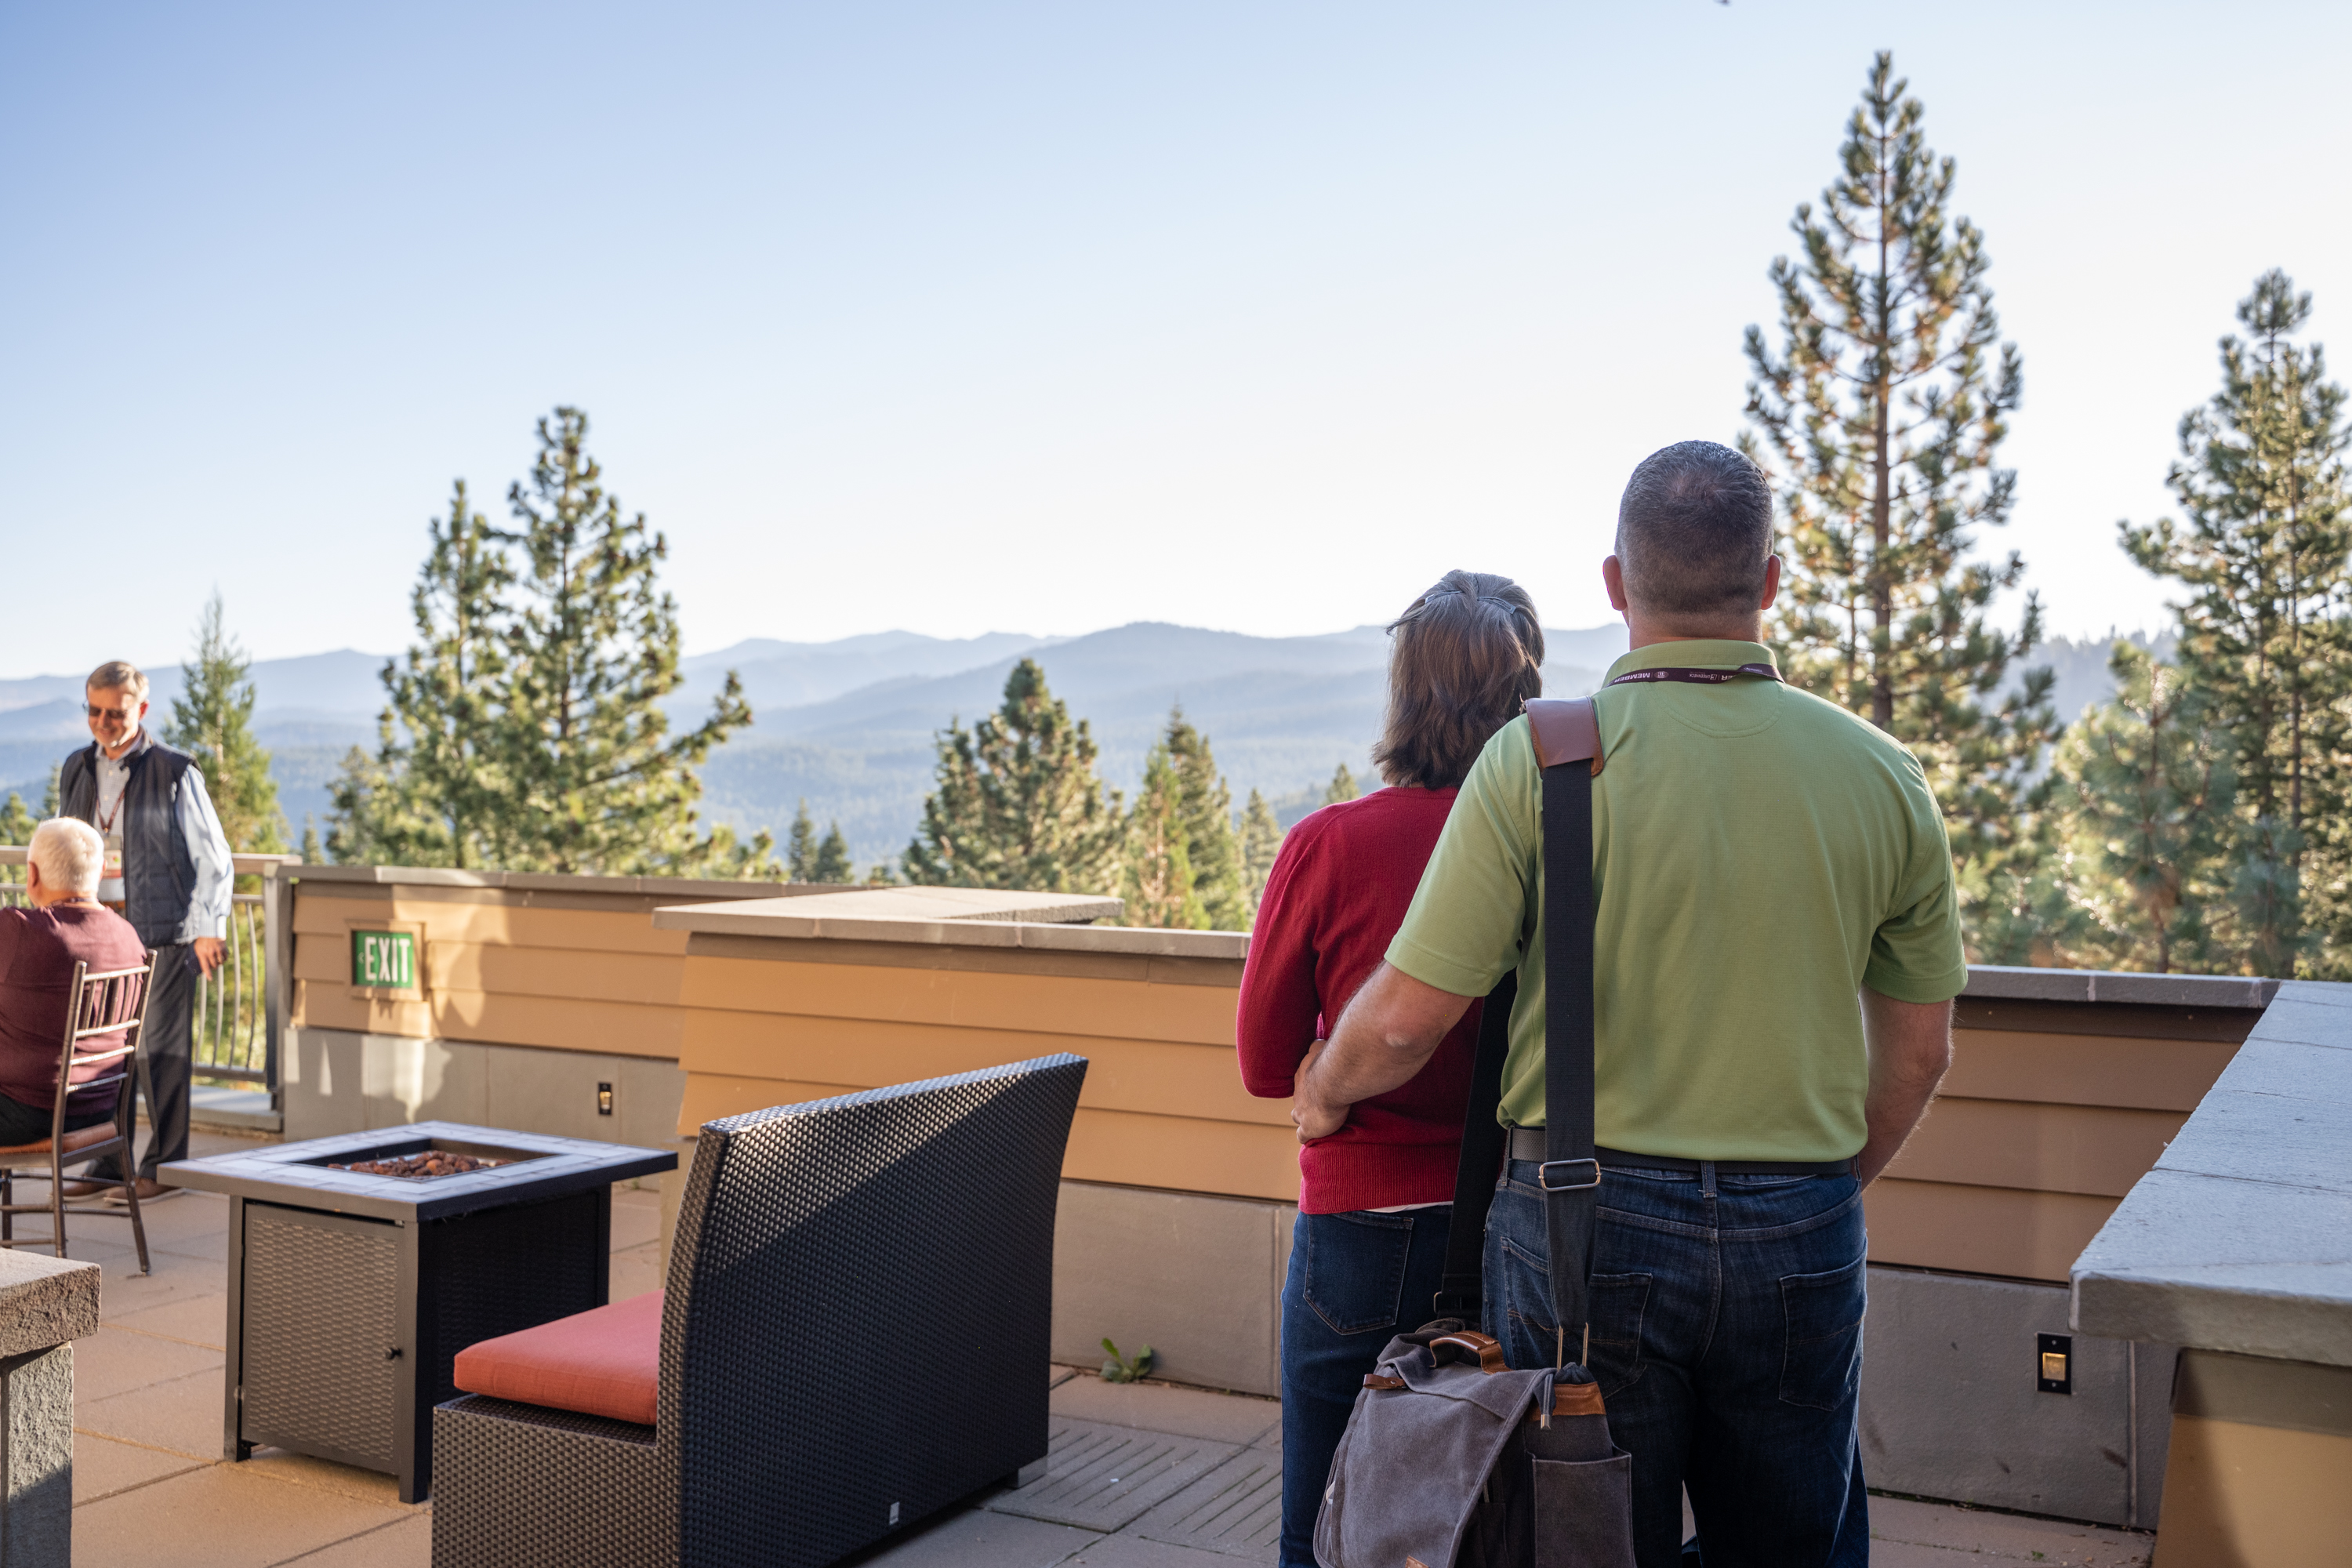 2022 AMCA Annual Meeting attendees take in the view of Lake Tahoe.